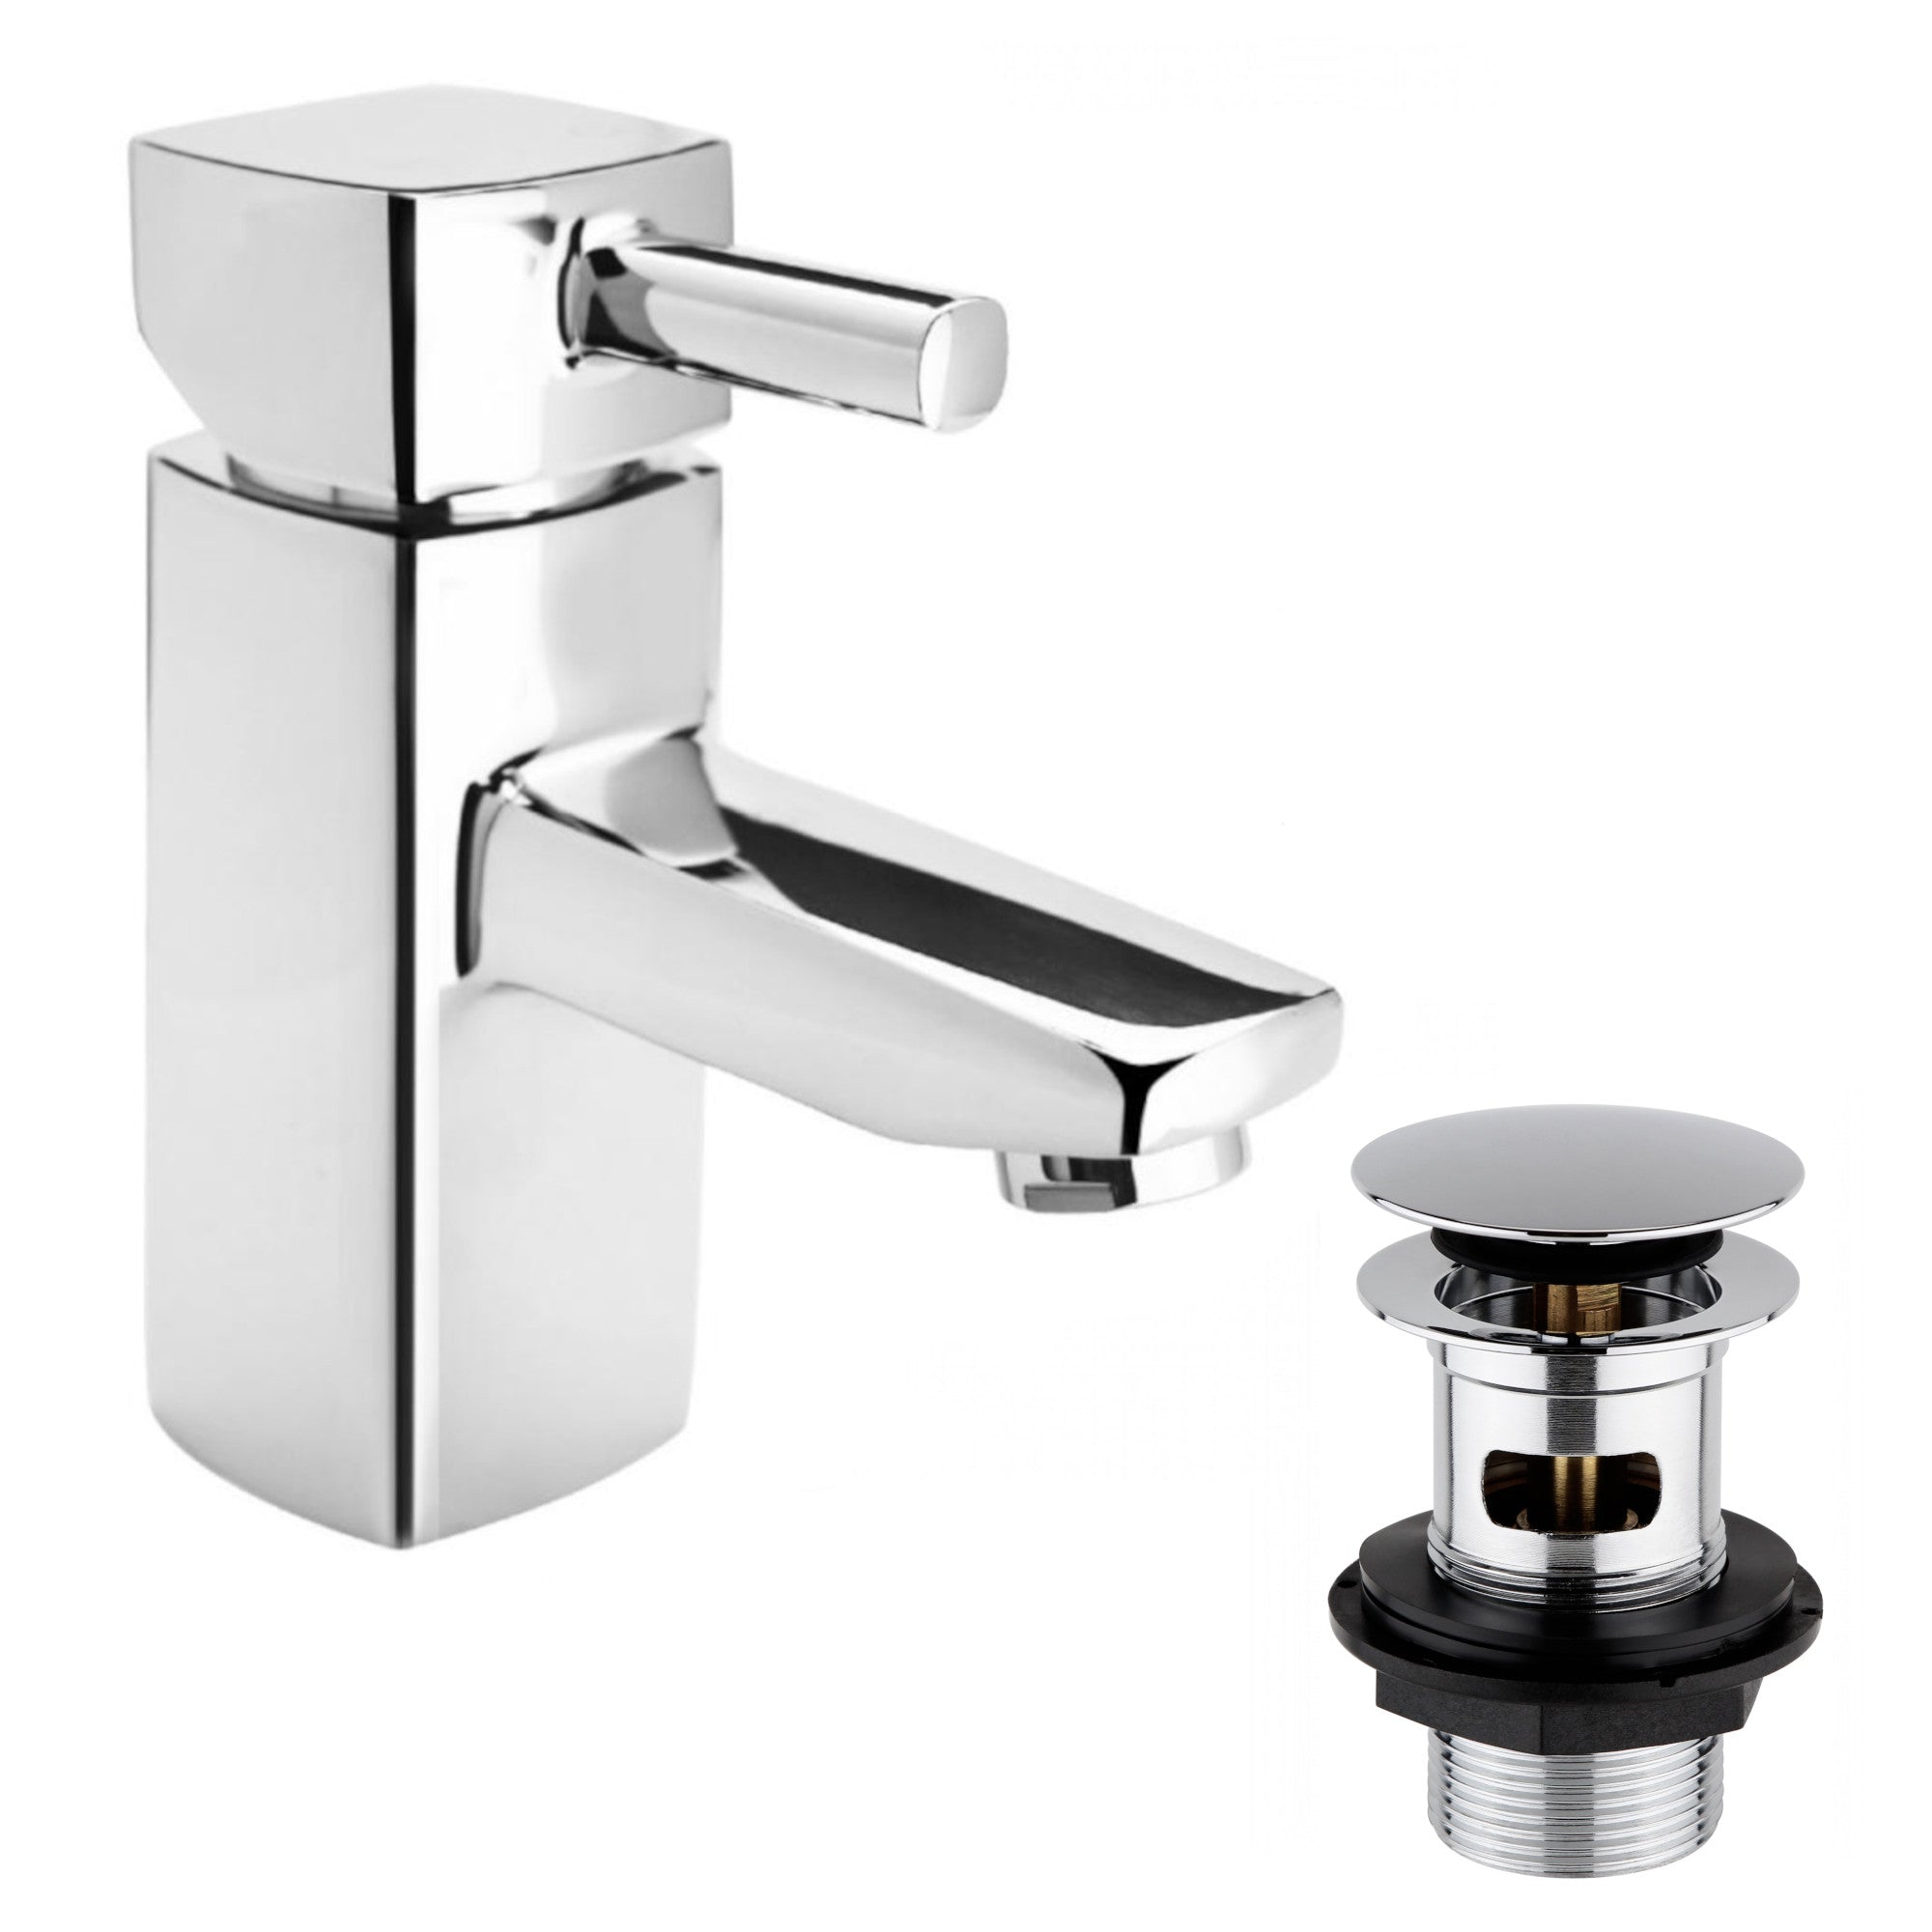 Stella basin mixer tap with slotted waste - chrome